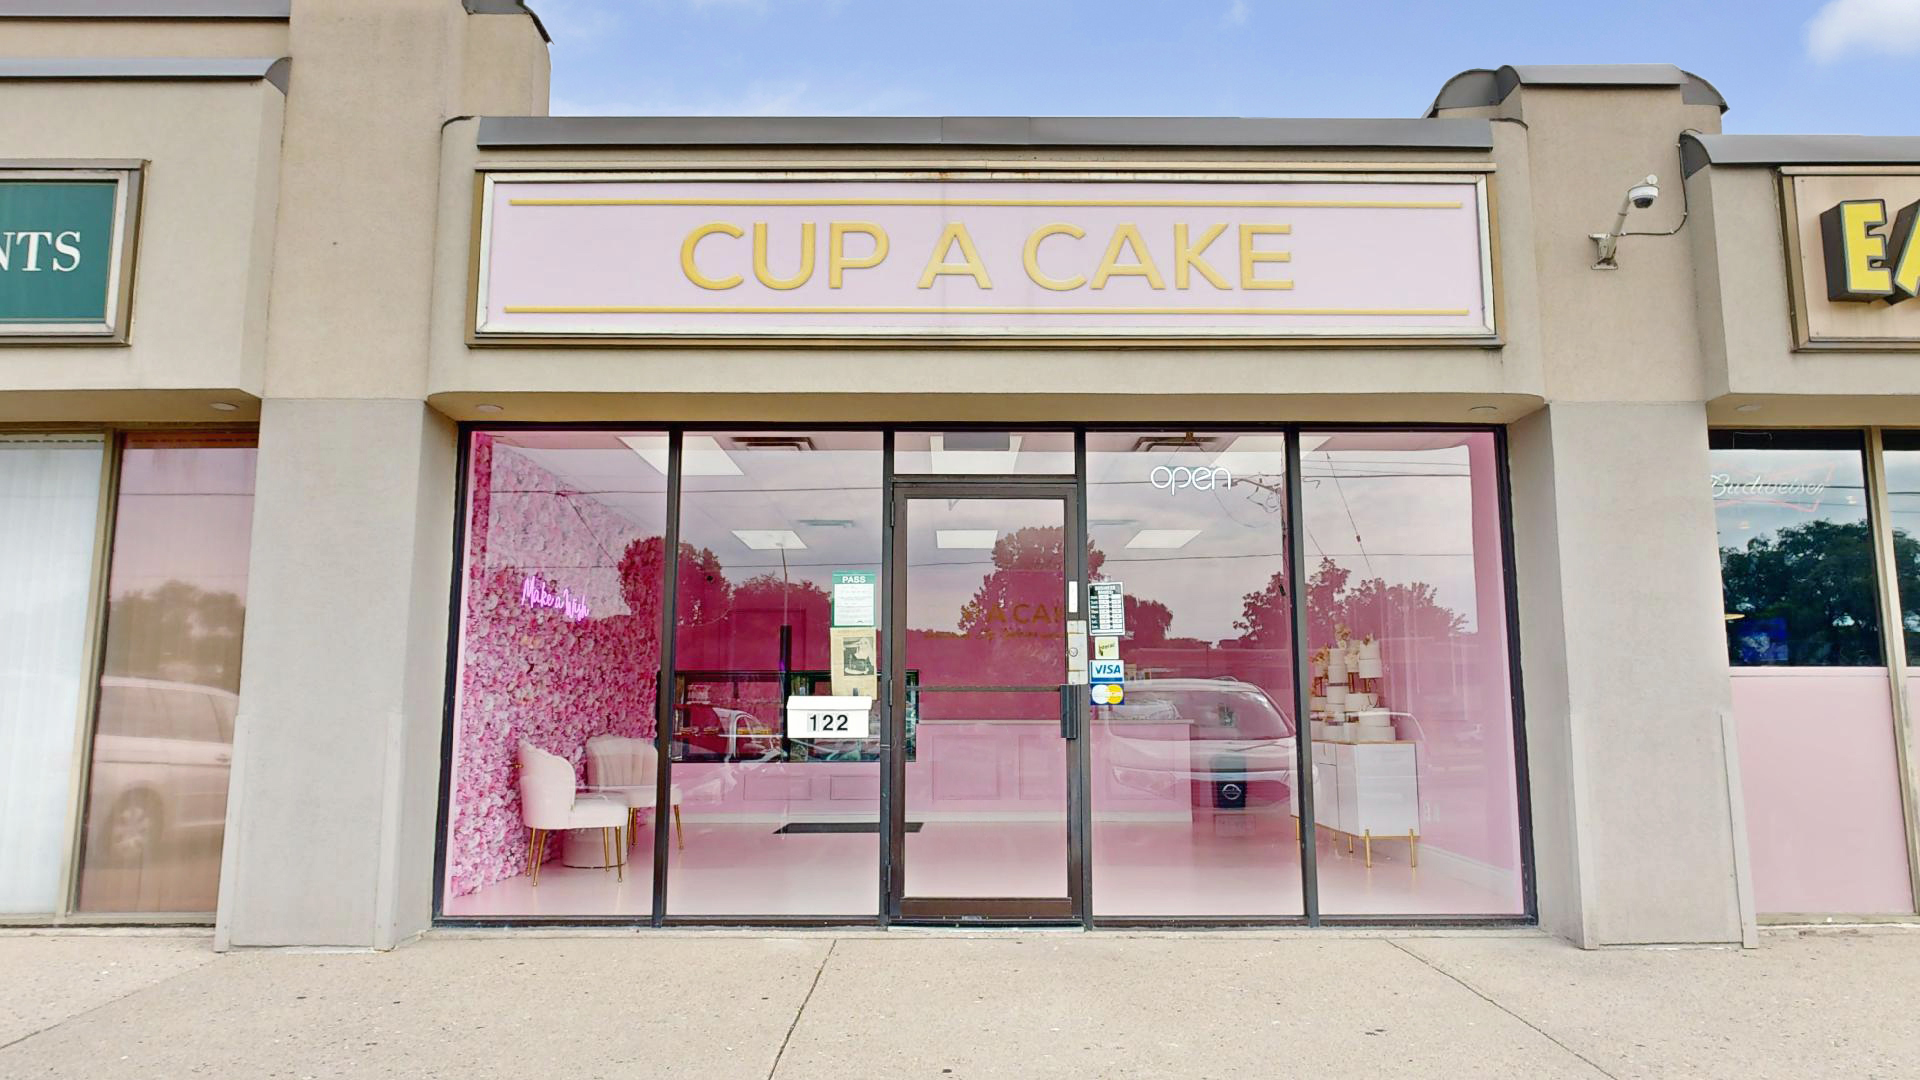 CUP A CAKE